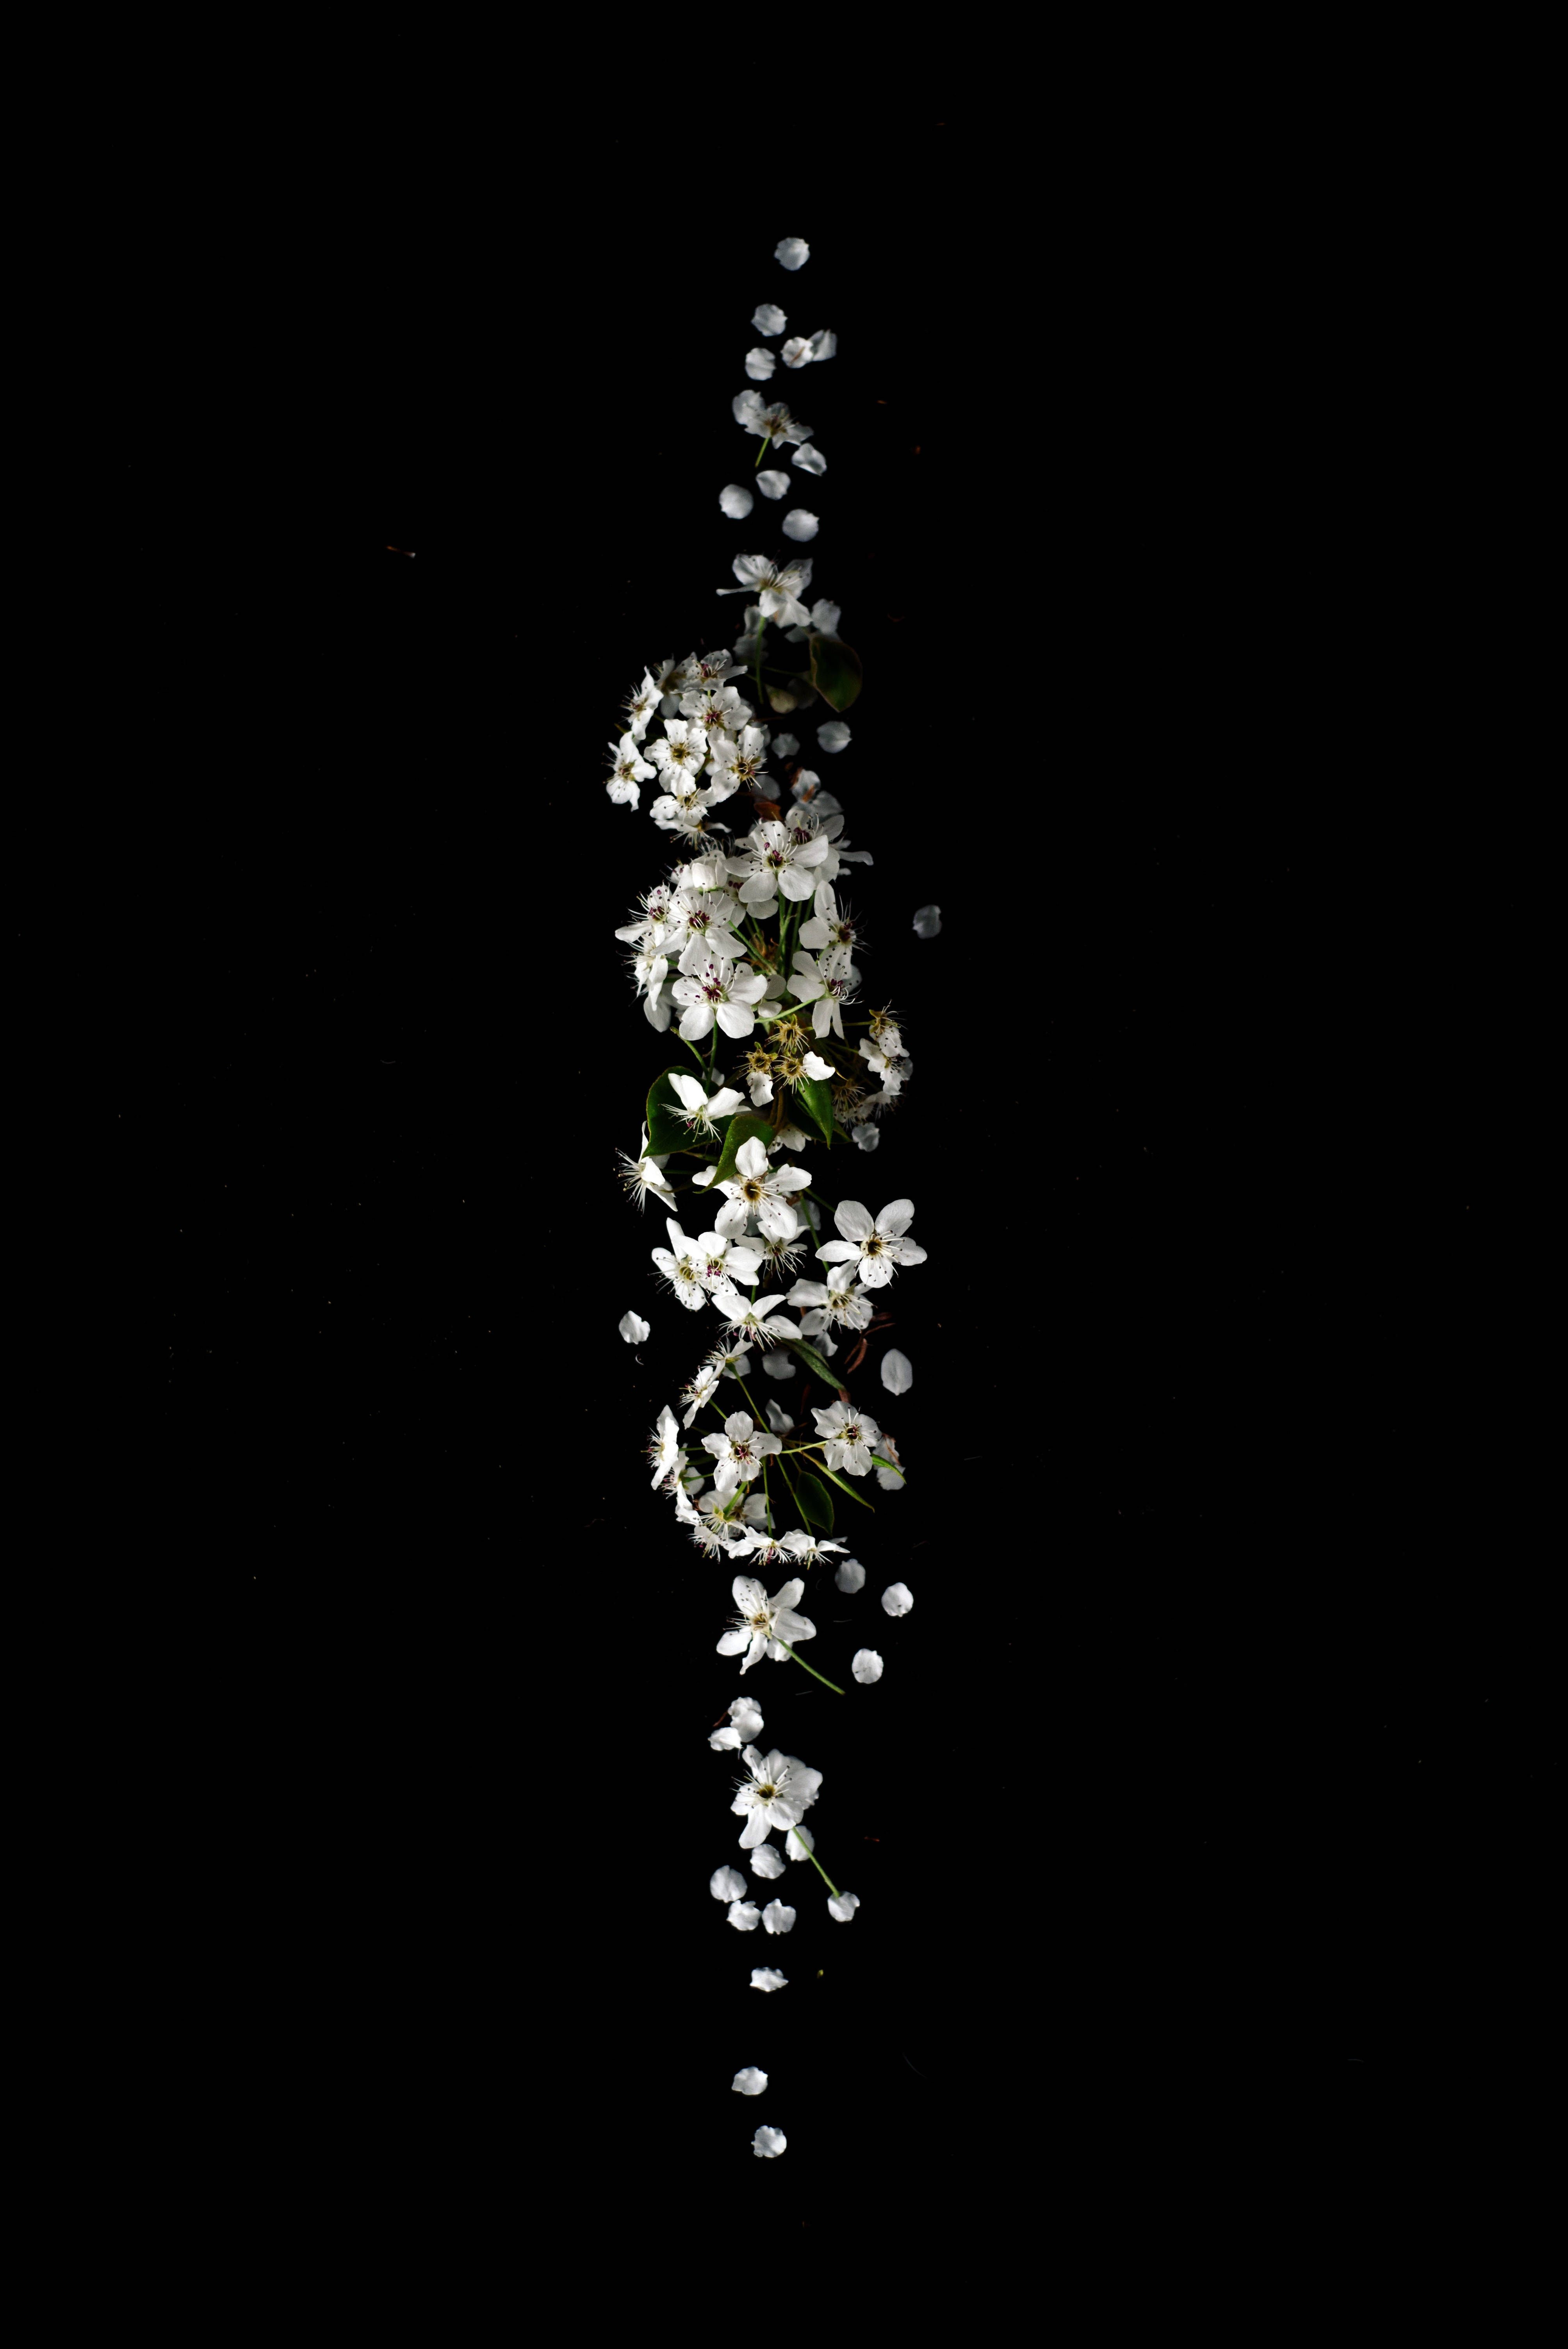 Caption: Beautiful Cluster Of White Flowers With Dot Notch Detail